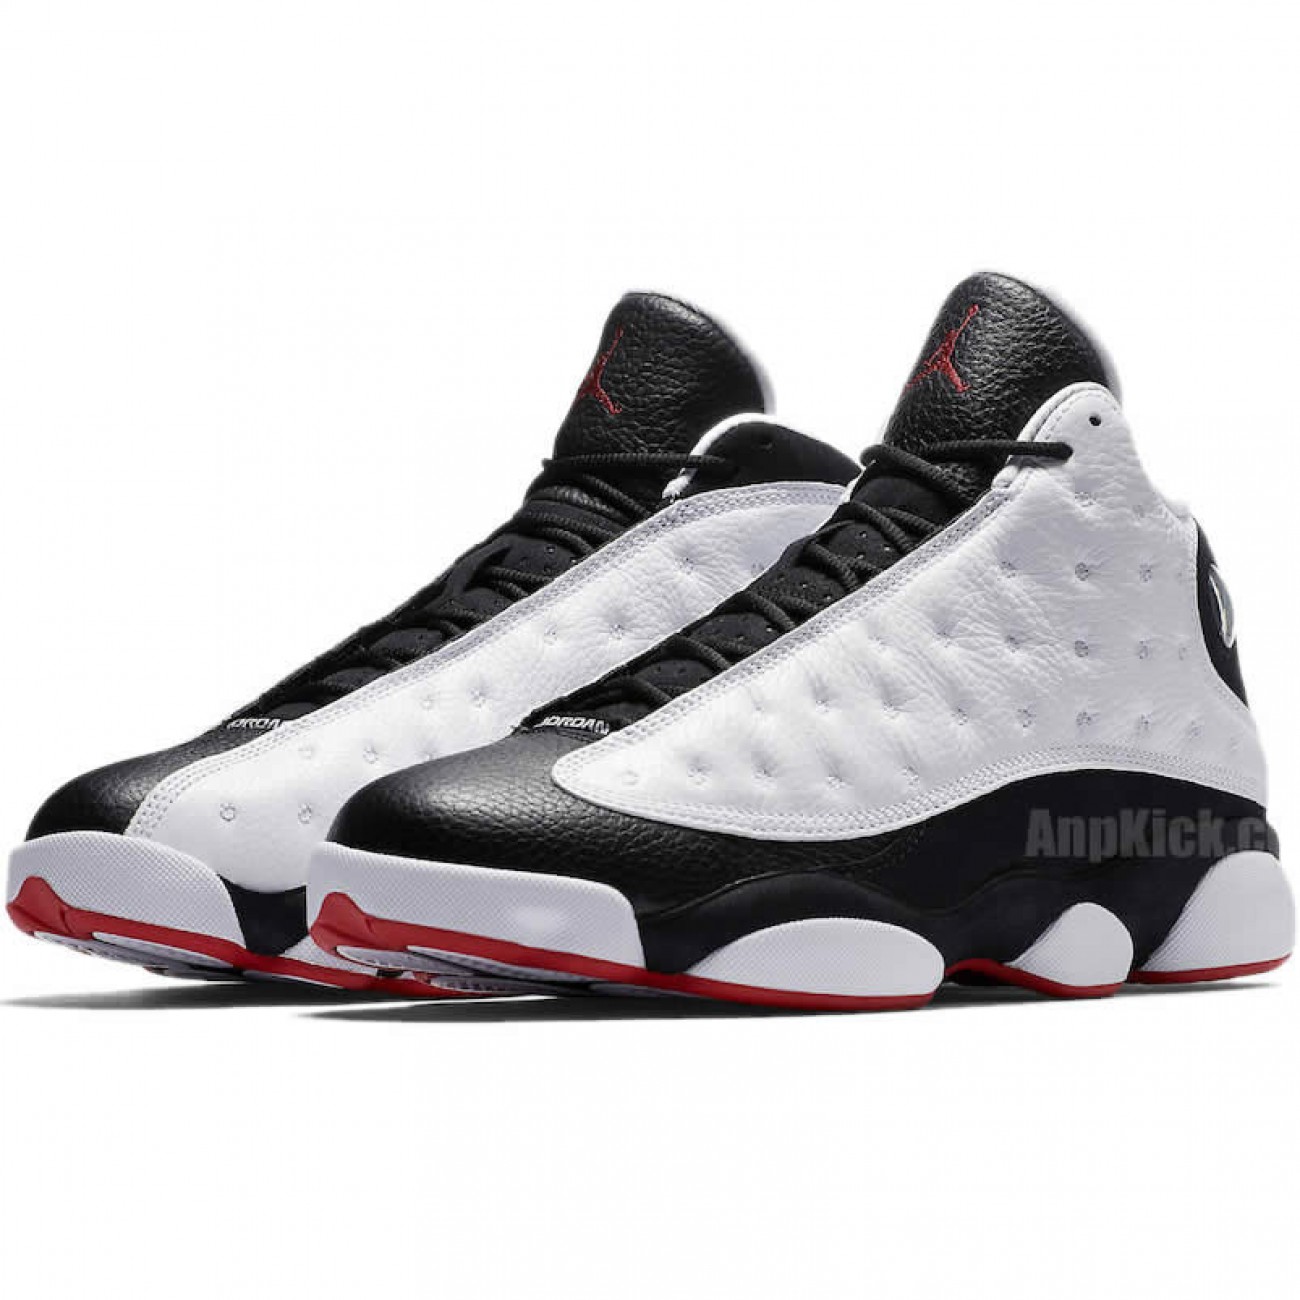 Air Jordan 13 "He Got Game" 2018 Black And White Outfit For Sale 414571-104